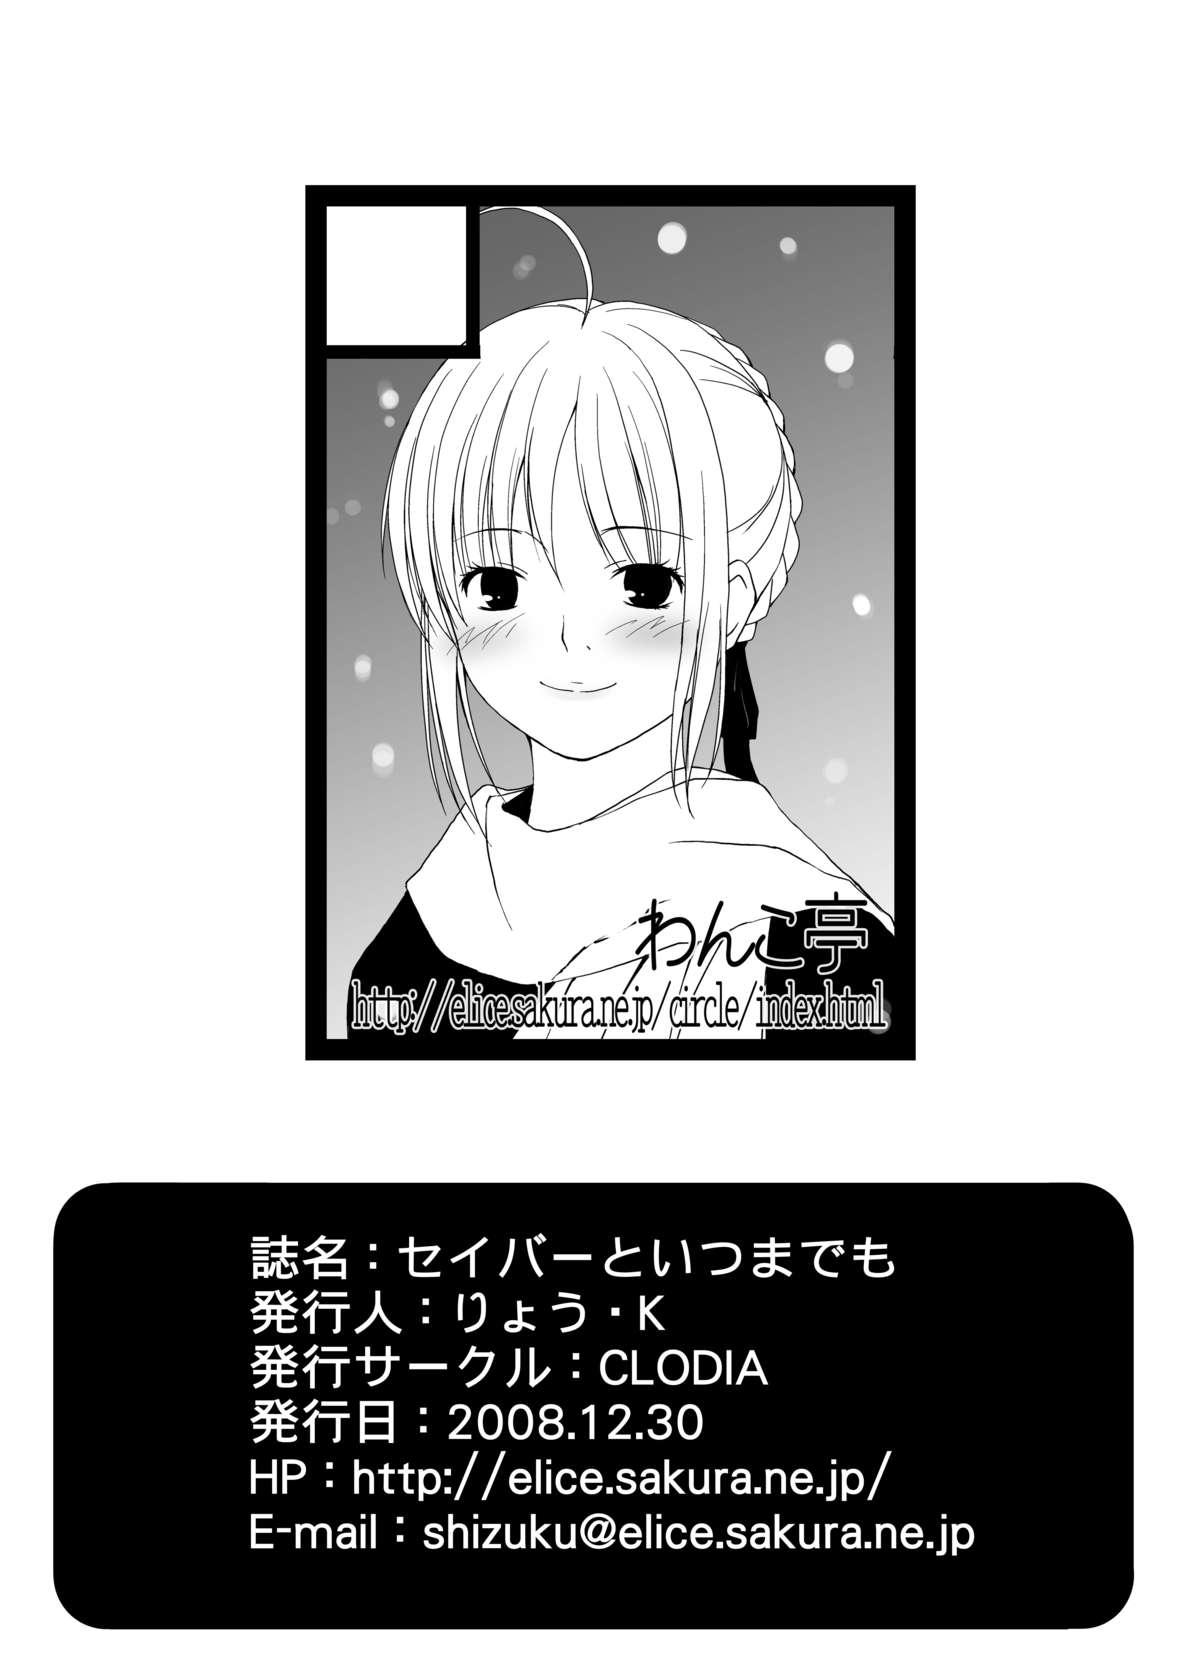 Chacal Saber to Itsumademo - Fate stay night Soloboy - Page 17